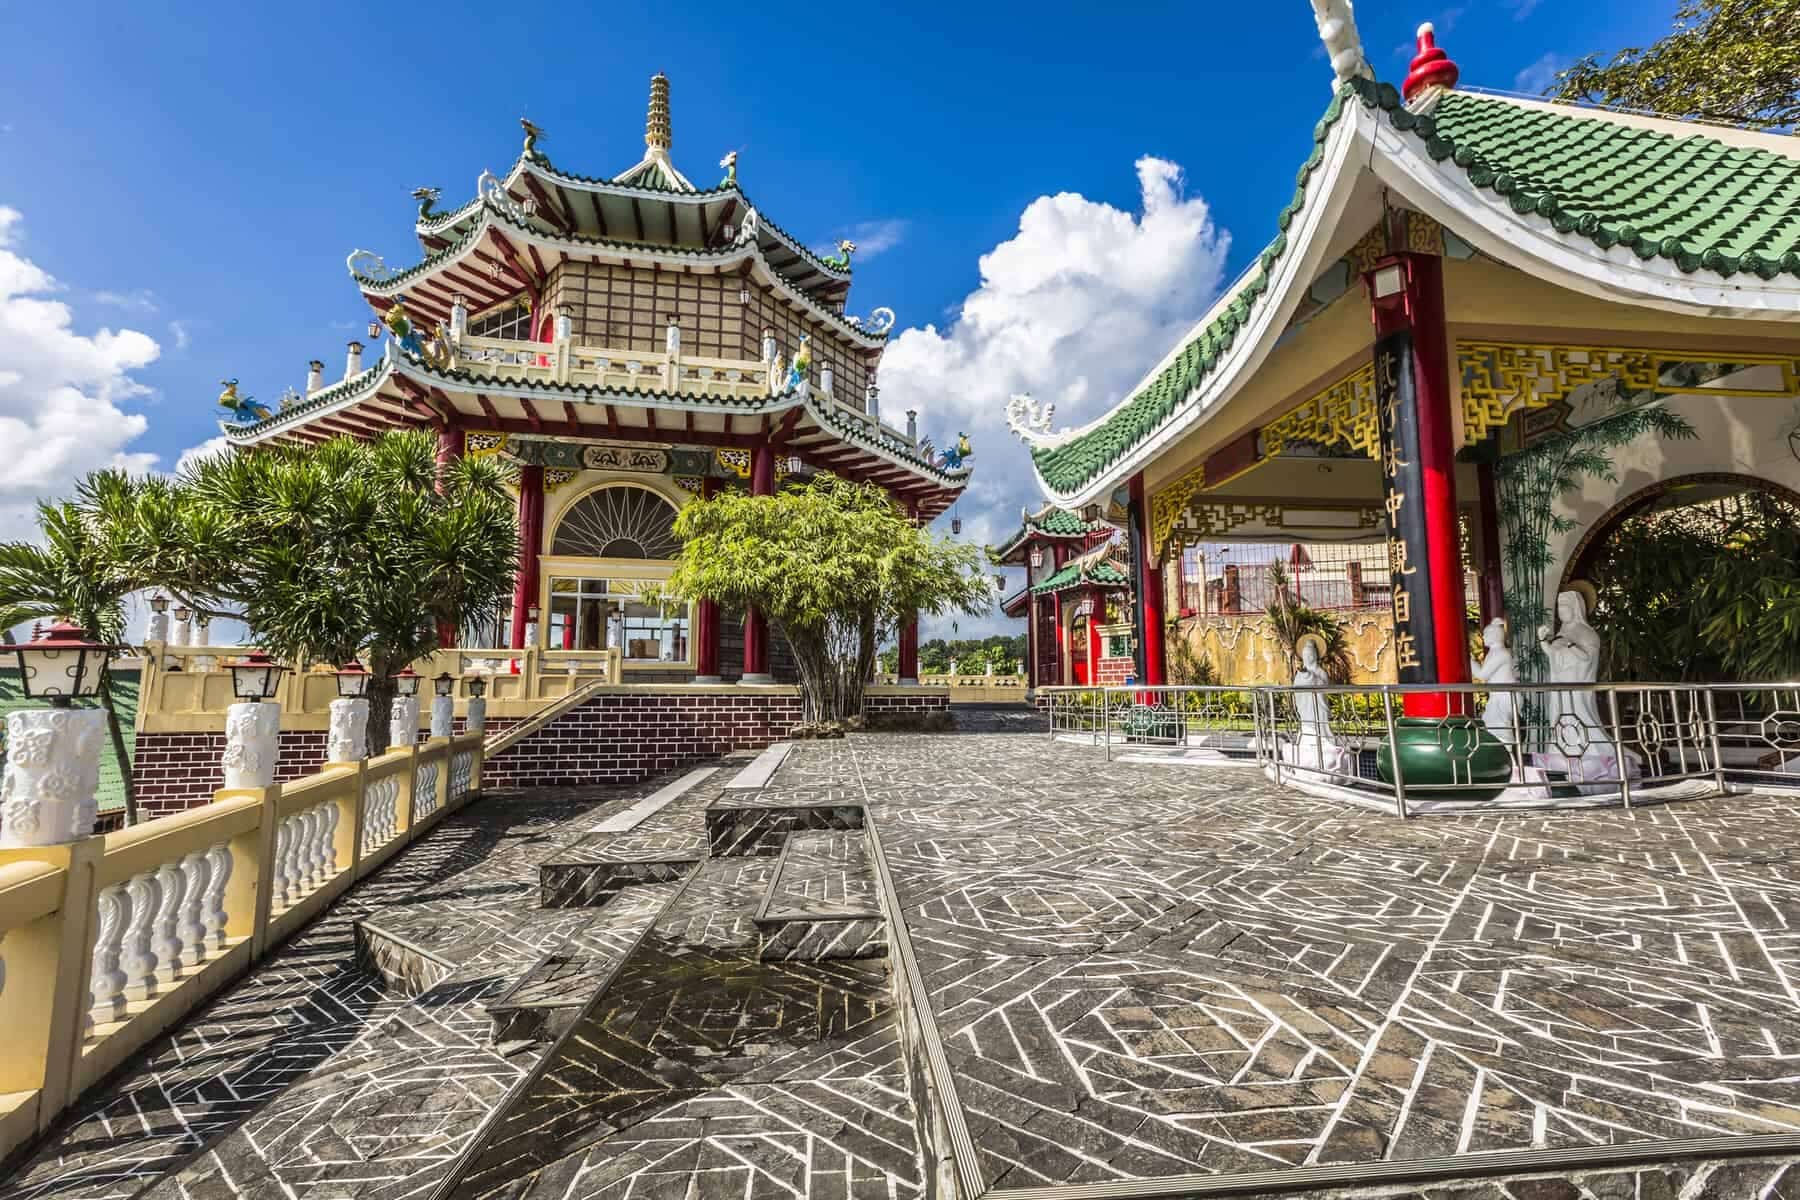 Pagoda and dragon sculpture of the Taoist Temple in Cebu, Philippines.